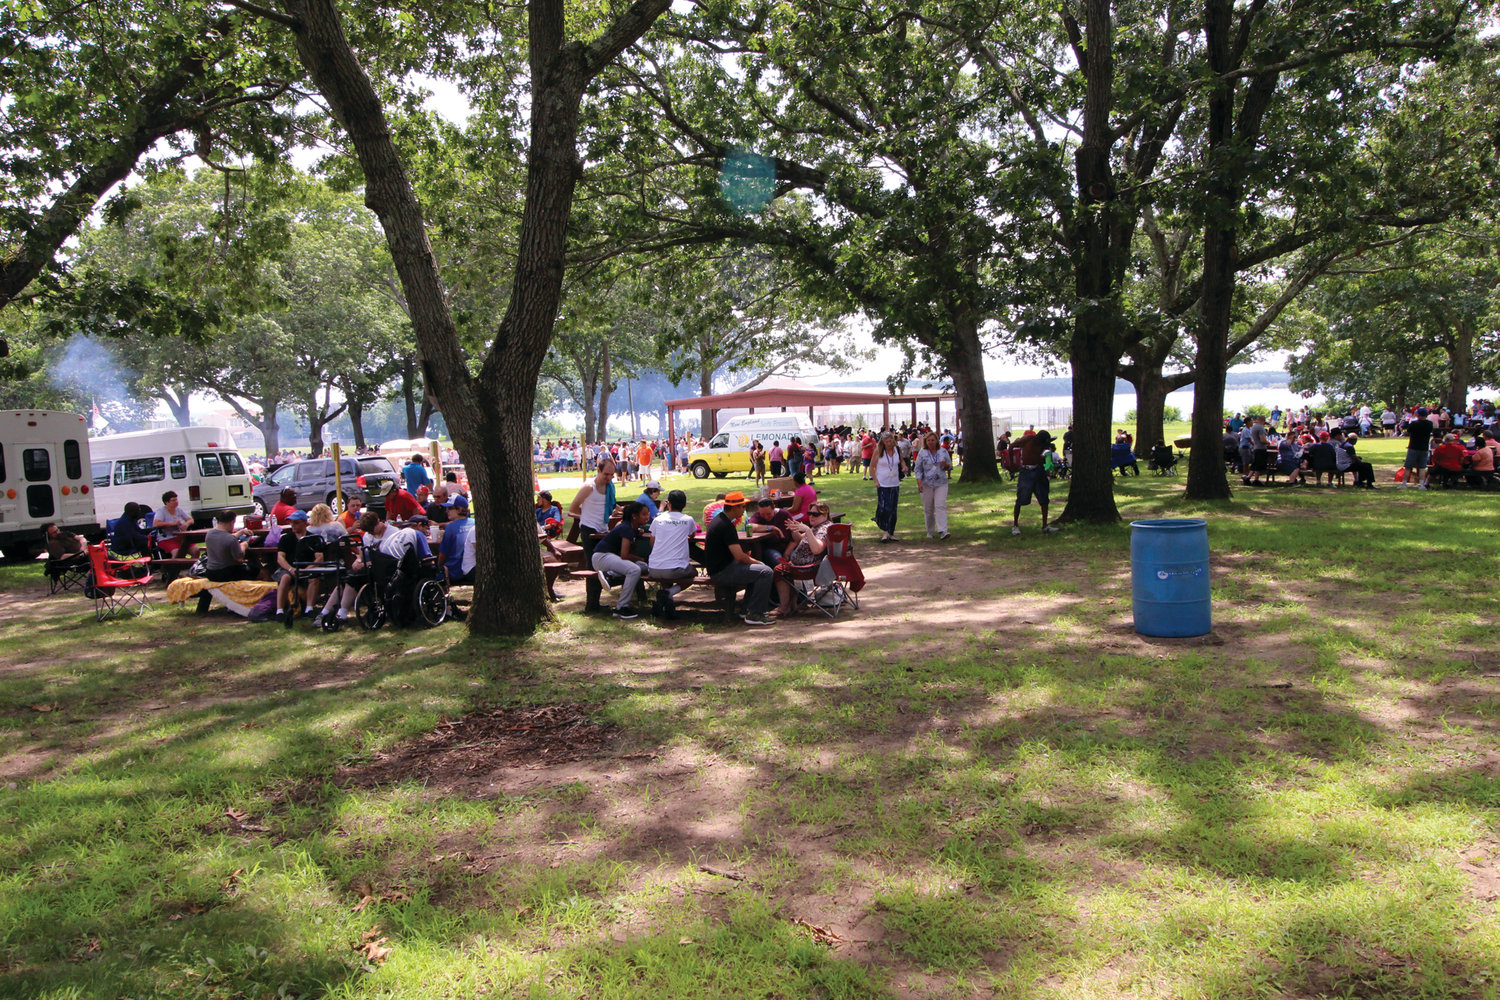 NOW THAT'S A PICNIC:  An estimated 1,800 people turned out to a picnic outing for special needs citizens hosted by the Elks Thursday at the Masonic Youth Center on Long Street. The event including music and visits from the Shriner clowns has become a seasonal favorite for many and gets larger year by year.